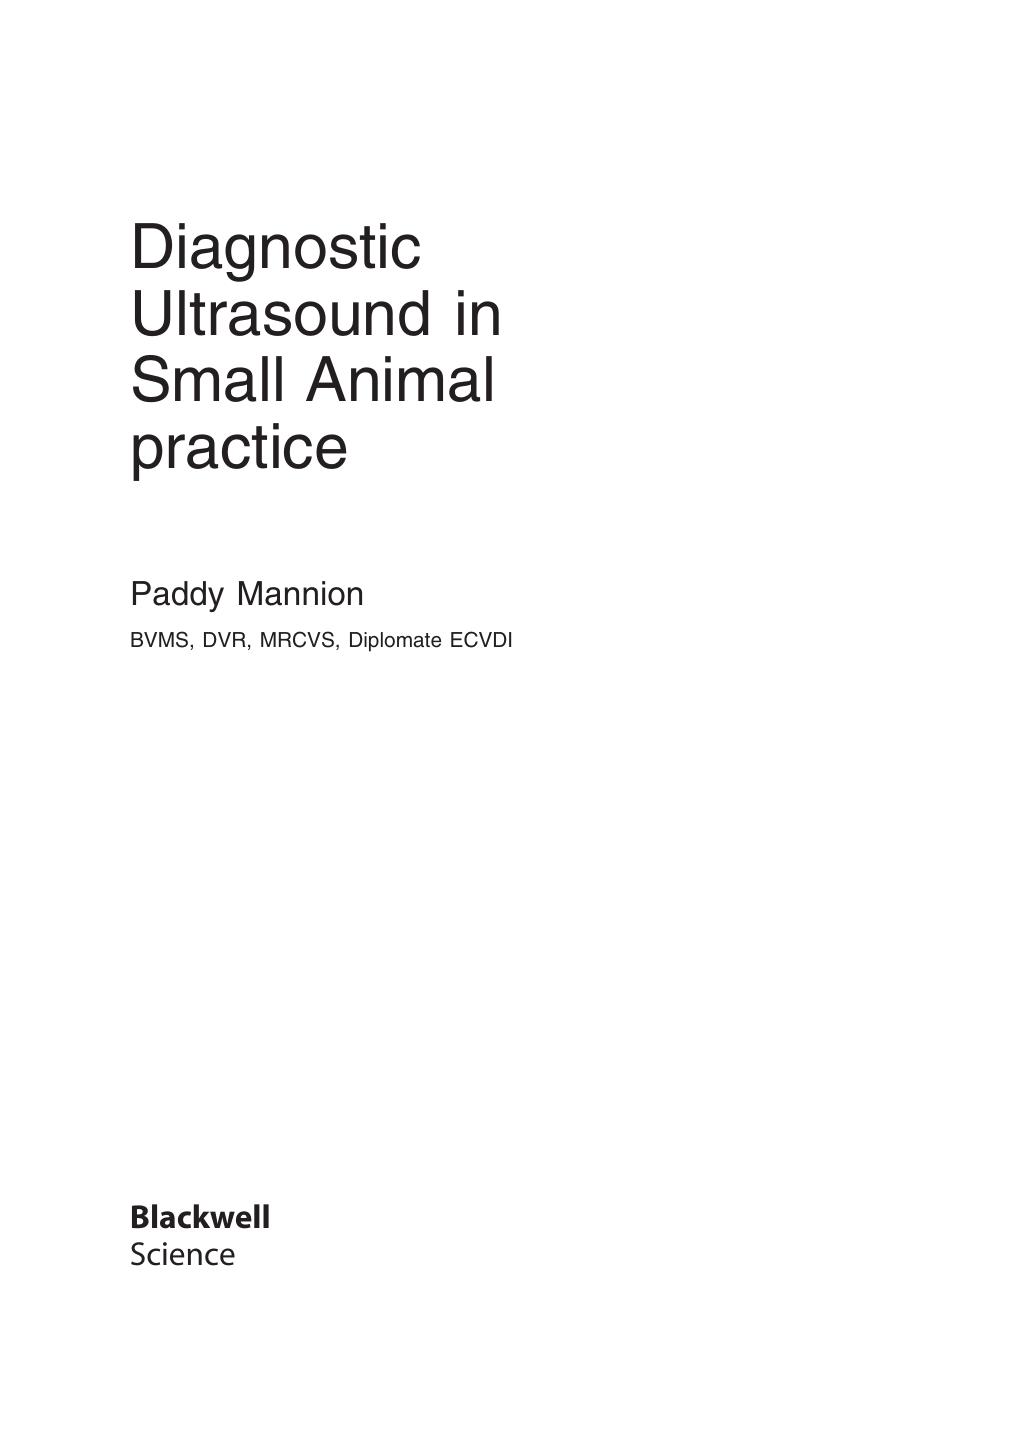 Diagnostic Ultrasound in Small Animal Practice                                                                                                                  2006